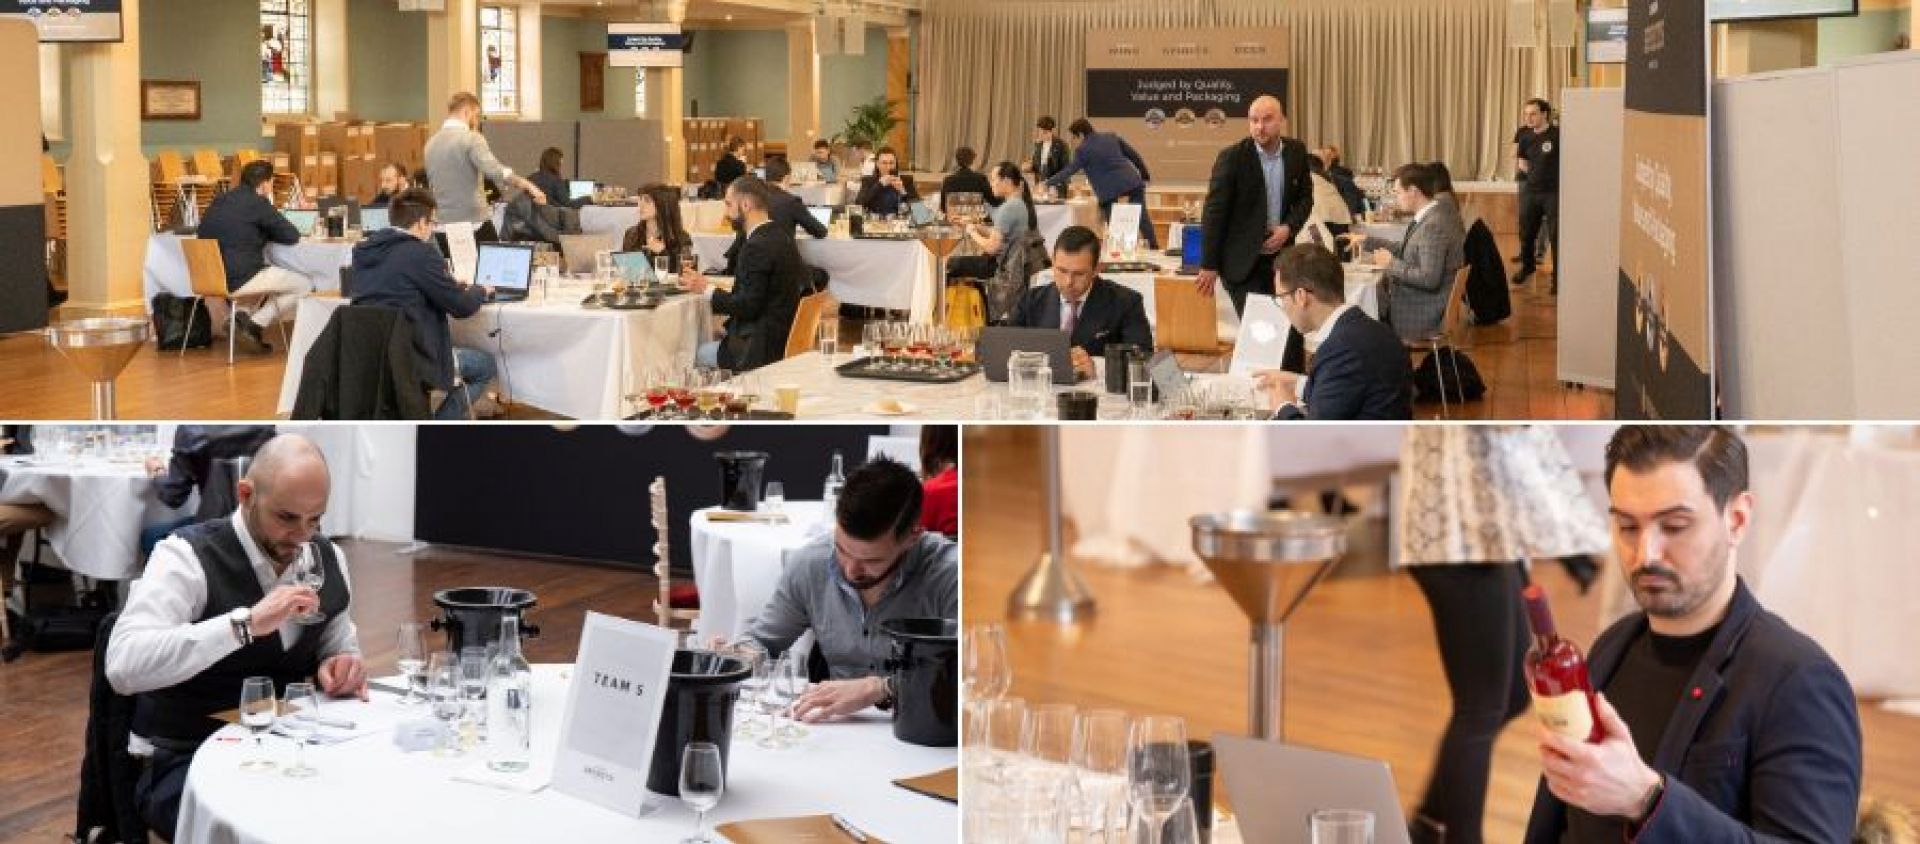 Photo for: London Competition organisers to launch first UK Trade Tasting in London